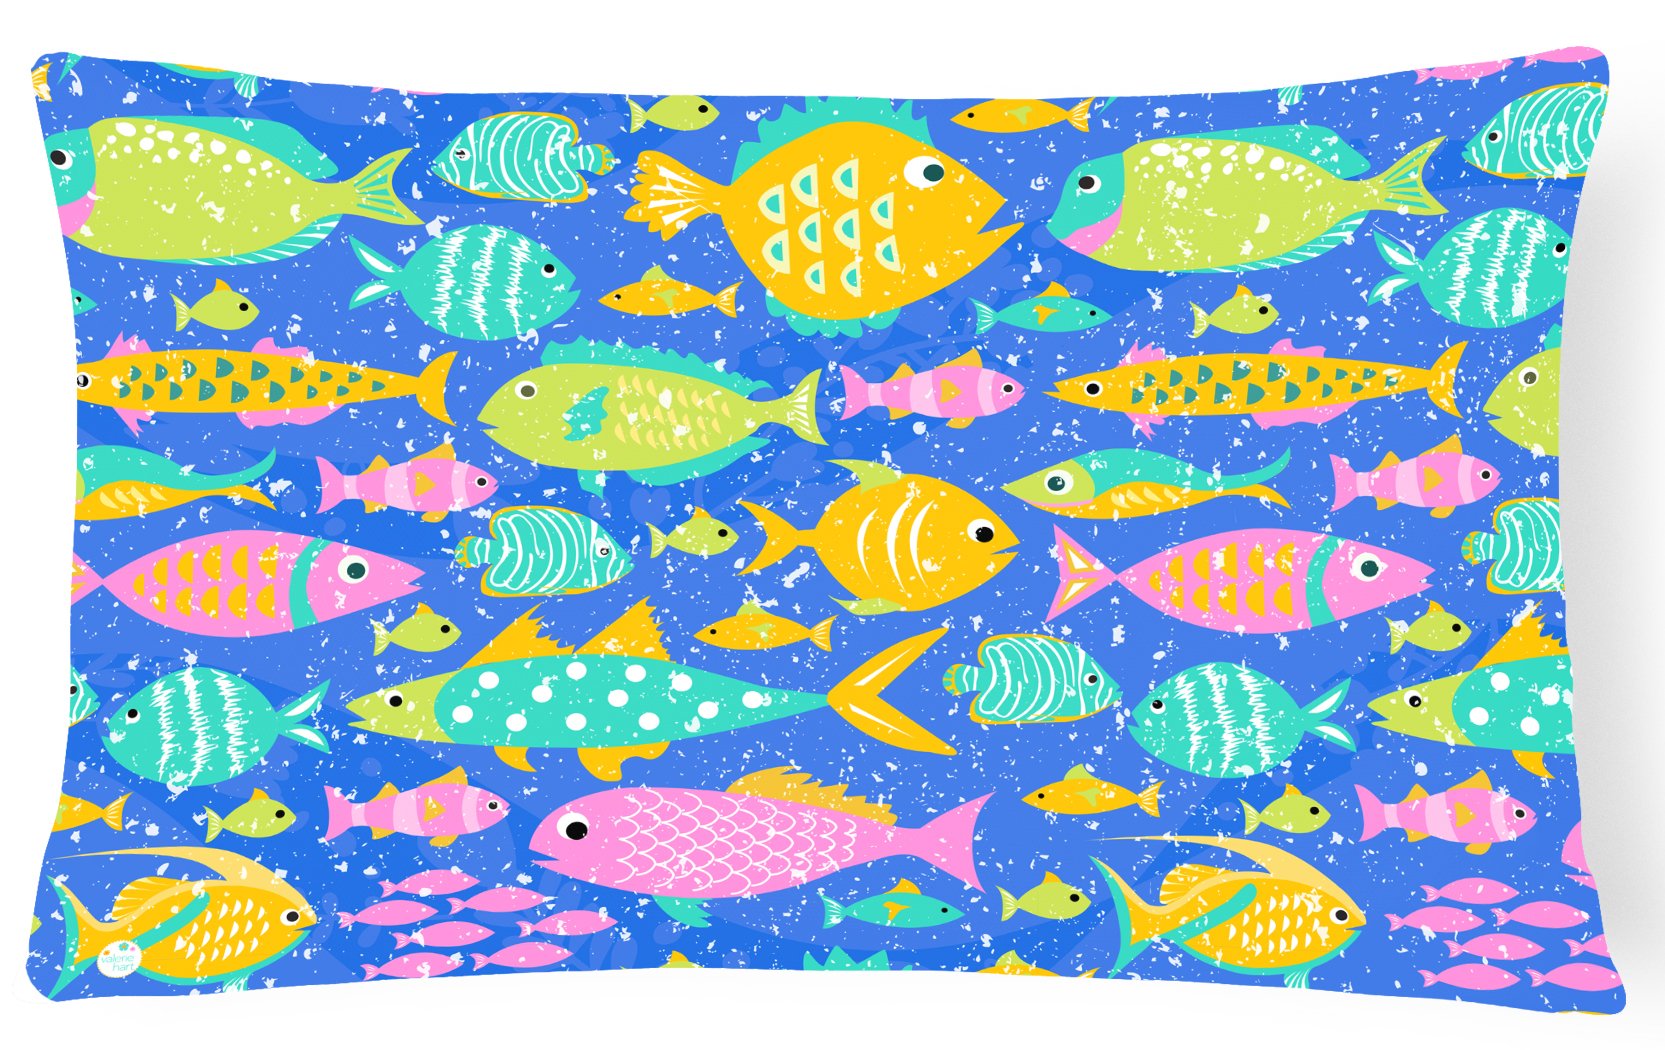 Little Colorful Fishes Canvas Fabric Decorative Pillow VHA3034PW1216 by Caroline's Treasures